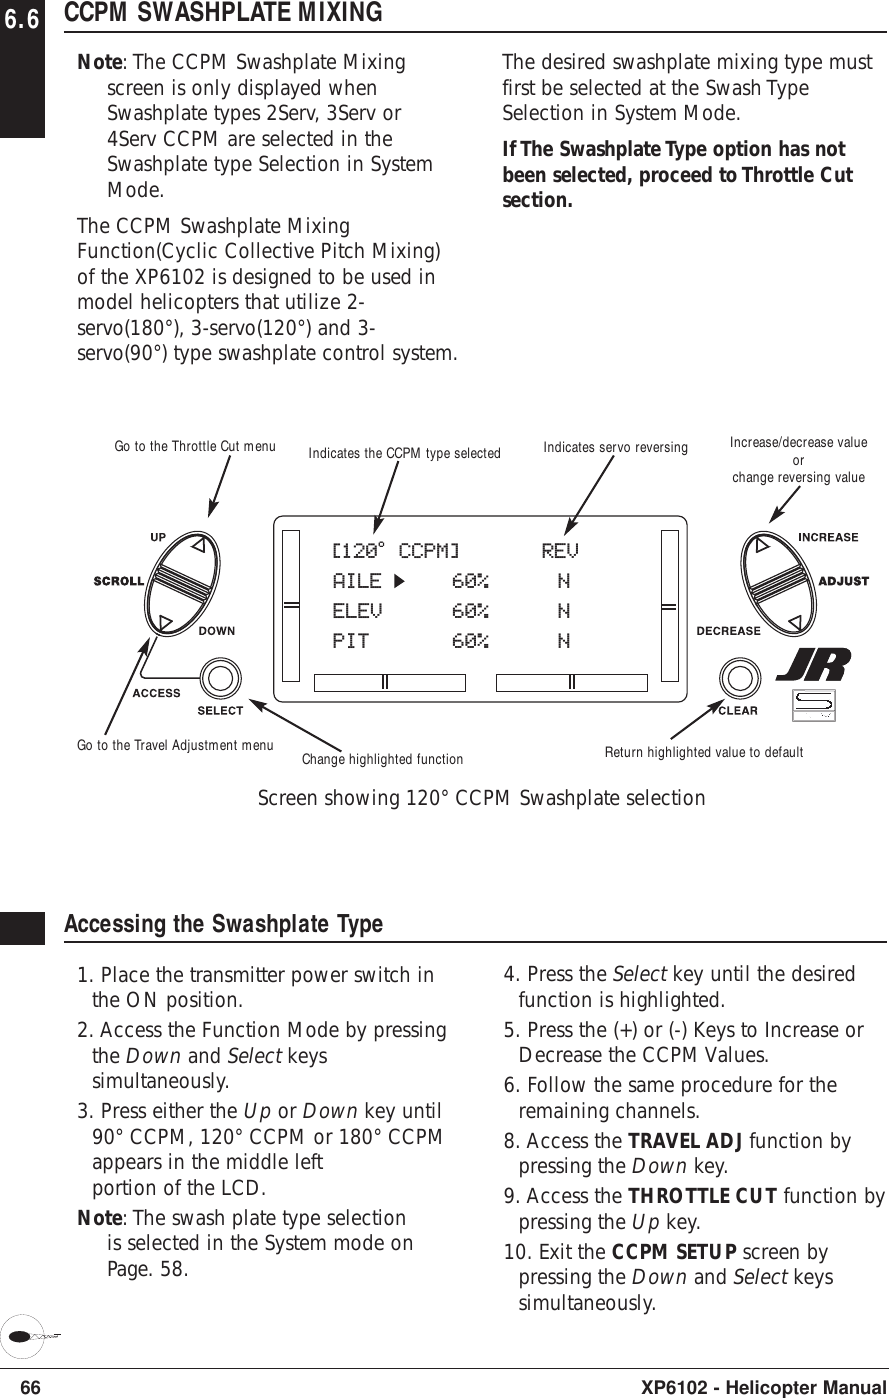 6.6 CCPM SWASHPLATE MIXINGNote: The CCPM Swashplate Mixingscreen is only displayed whenSwashplate types 2Serv, 3Serv or4Serv CCPM are selected in theSwashplate type Selection in SystemMode.The CCPM Swashplate MixingFunction(Cyclic Collective Pitch Mixing)of the XP6102 is designed to be used inmodel helicopters that utilize 2-servo(180°), 3-servo(120°) and 3-servo(90°) type swashplate control system.The desired swashplate mixing type mustfirst be selected at the Swash TypeSelection in System Mode.If The Swashplate Type option has notbeen selected, proceed to Throttle Cutsection.66 XP6102 - Helicopter ManualAccessing the Swashplate Type1. Place the transmitter power switch inthe ON position.2. Access the Function Mode by pressingthe Down and Select keyssimultaneously.3. Press either the Up or Down key until90° CCPM, 120° CCPM or 180° CCPMappears in the middle leftportion of the LCD.Note: The swash plate type selectionis selected in the System mode onPage. 58.4. Press the Select key until the desiredfunction is highlighted.5. Press the (+) or (-) Keys to Increase orDecrease the CCPM Values.6. Follow the same procedure for theremaining channels.8. Access the TRAVEL ADJ function bypressing the Down key.9. Access the THROTTLE CUT function bypressing the Up key.10. Exit the CCPM SETUP screen bypressing the Down and Select keyssimultaneously.[120o CCPM]     REVAILE    60% NELEV    60% NPIT    60% NGo to the Throttle Cut menuGo to the Travel Adjustment menuIndicates the CCPM type selected Indicates servo reversingChange highlighted function Return highlighted value to defaultIncrease/decrease valueorchange reversing valueScreen showing 120° CCPM Swashplate selection